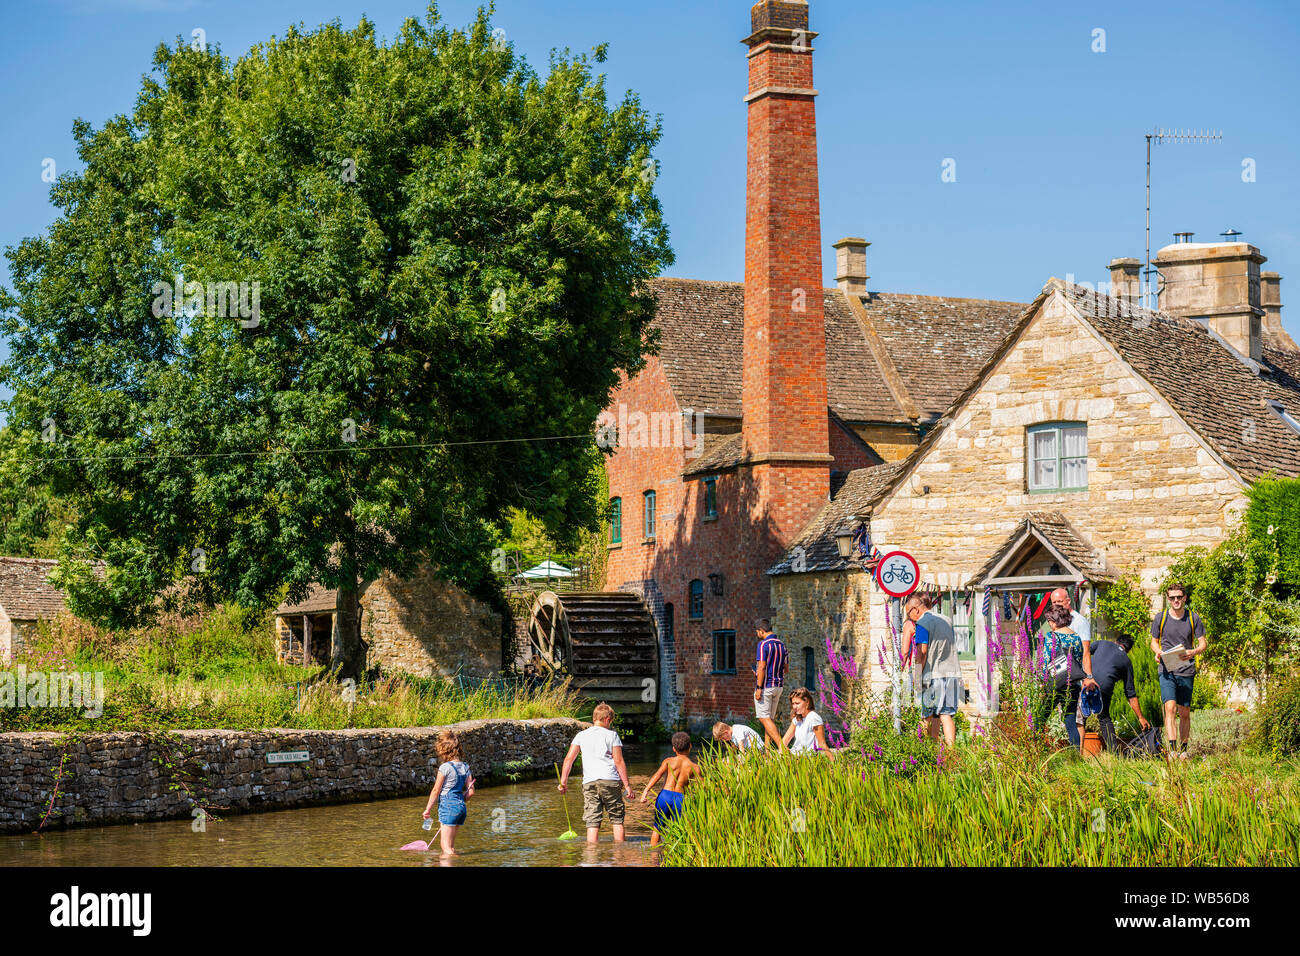 Children paddling in the river, Lower Slaughter, Cotswolds, UK. Stock Photo